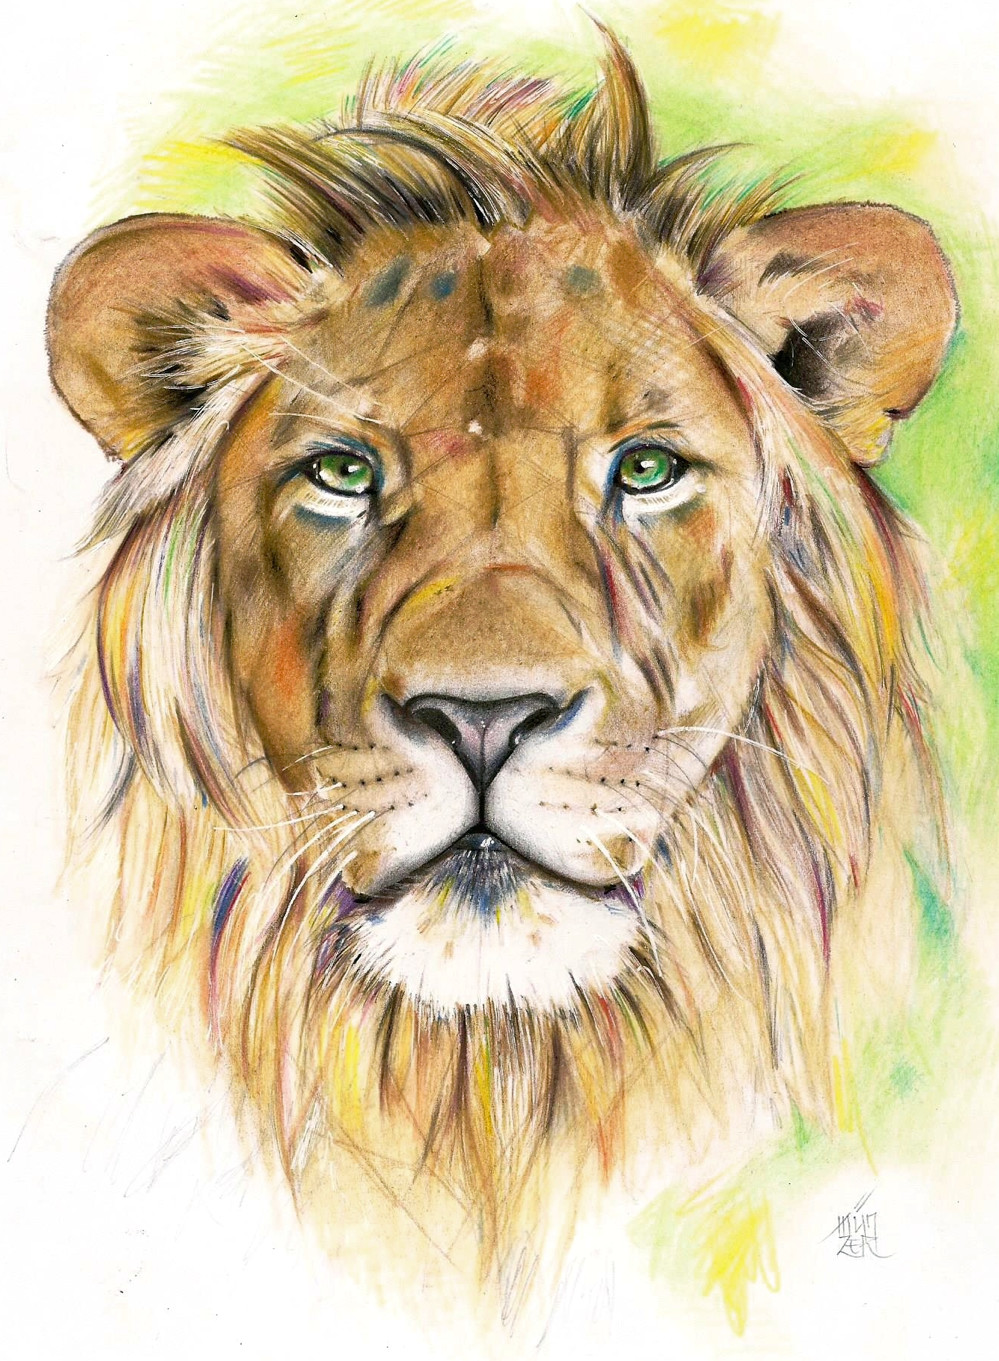 Drawing A Lions Eye Colored Pencils Drawing A4 Lion Art In 2018 Pinterest Pencil